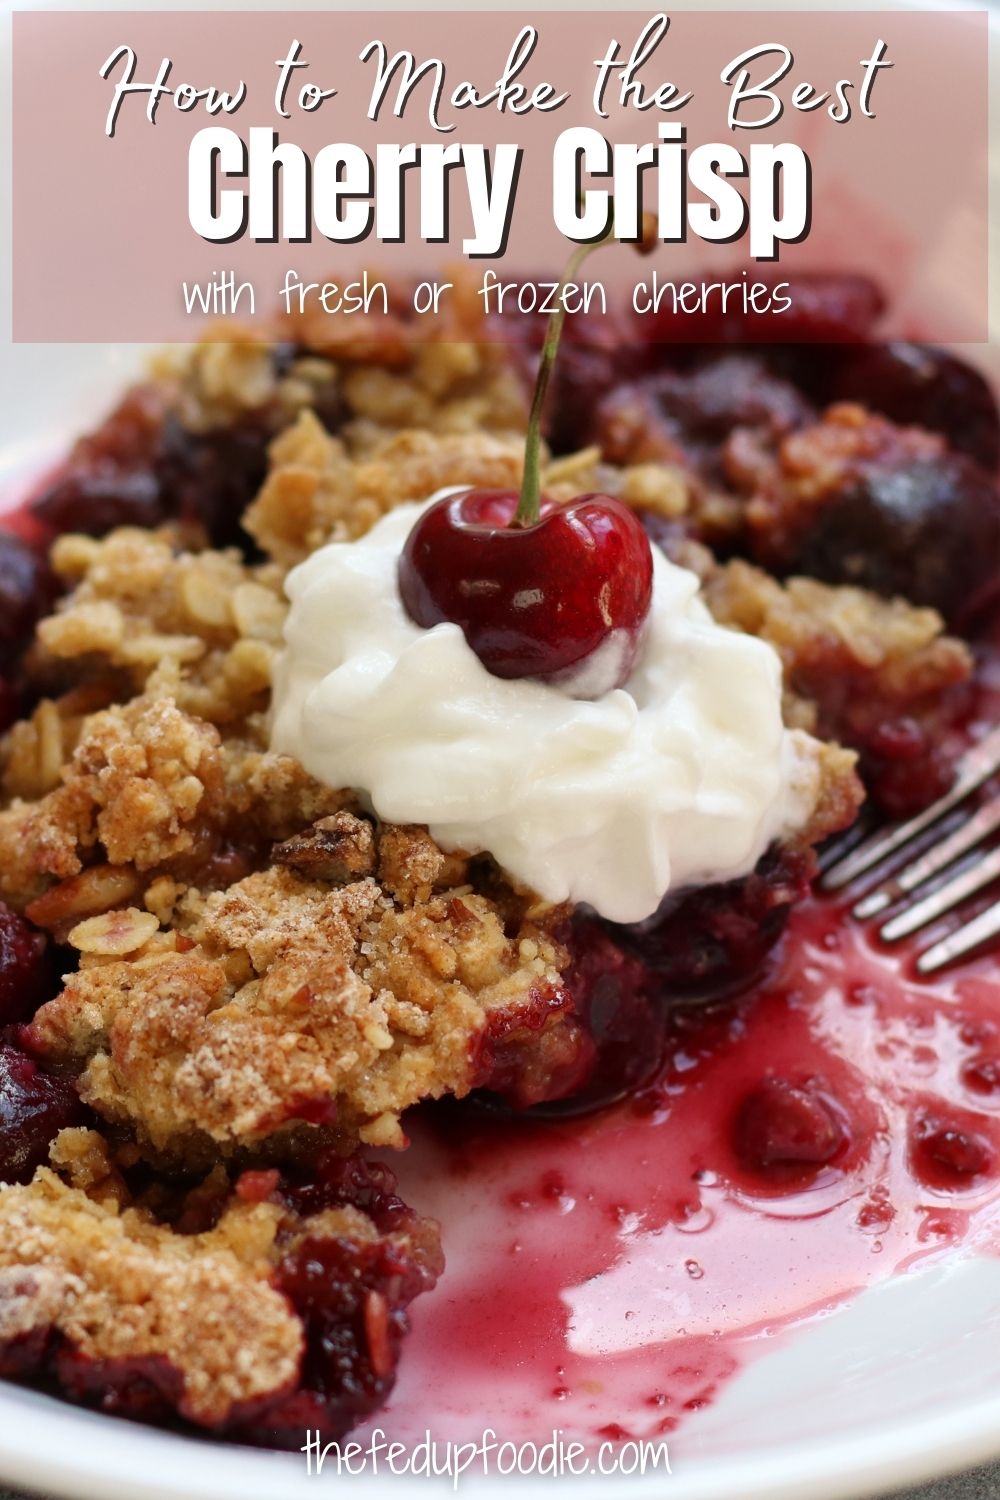 Homemade Cherry Crisp with an oatmeal pecan streusel topping is a simple and classic dessert the whole family will love. With a preparation time of 10 minutes, this cherry dessert is incredibly easy to make. Top with a scoop of vanilla ice cream or a dollop of whipped cream for a delicious treat.  
#CherryCrispWithFrozenCherries #CherryCrispWithFreshCherries #EasyCherryCrisp #CherryCrispWithPecans #CherryCrispWithOatmealTopping